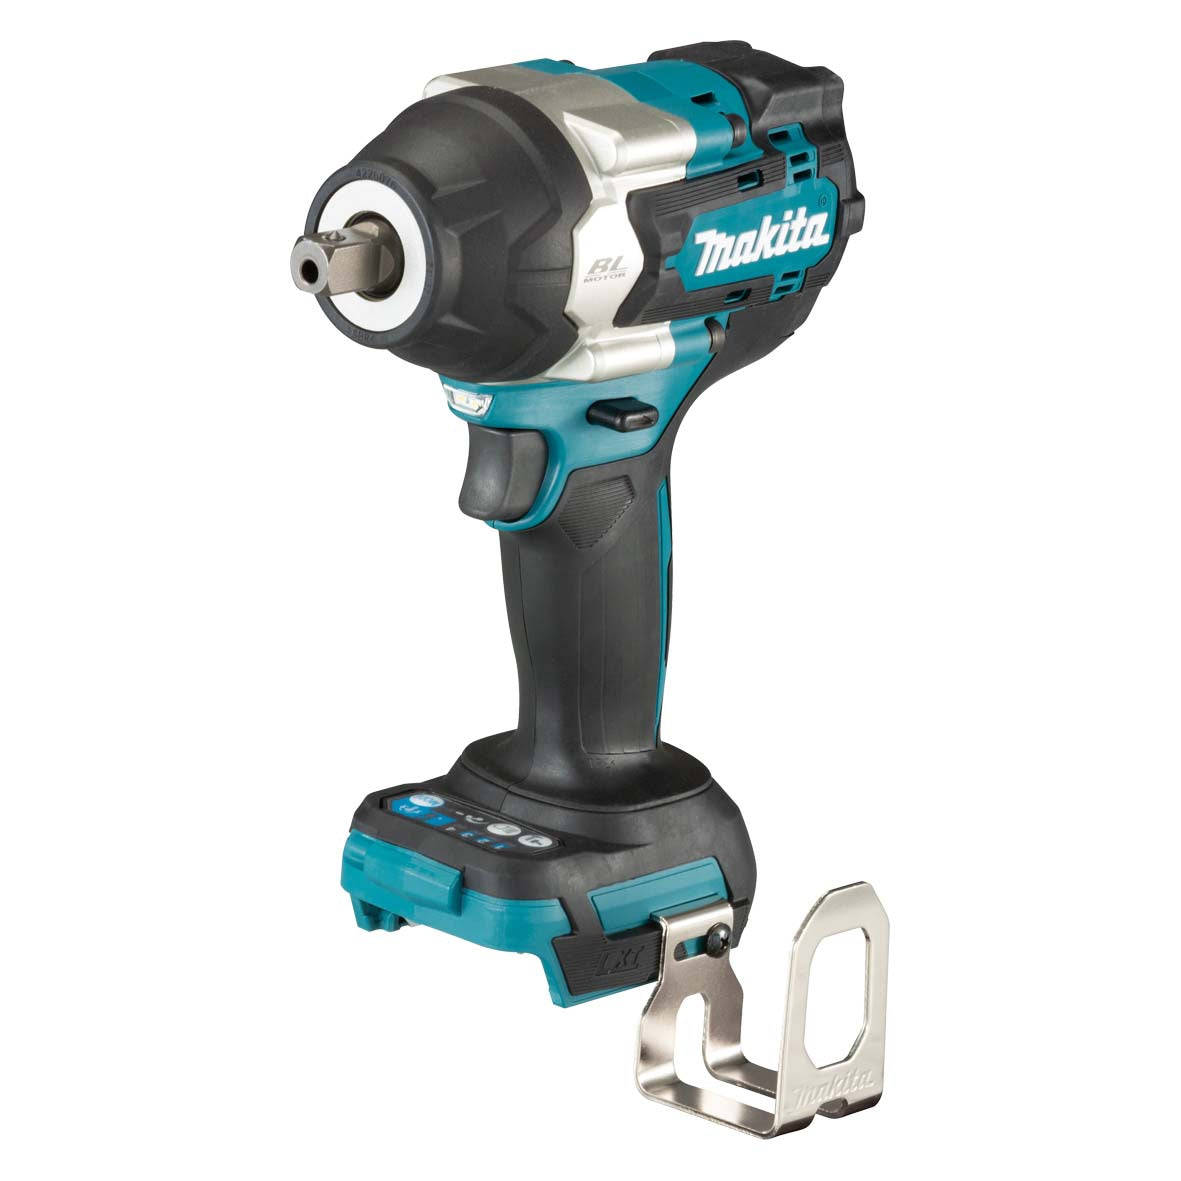 18V 1/2" Brushless Detent Pin Impact Wrench Bare (Tool Only) DTW701Z by Makita